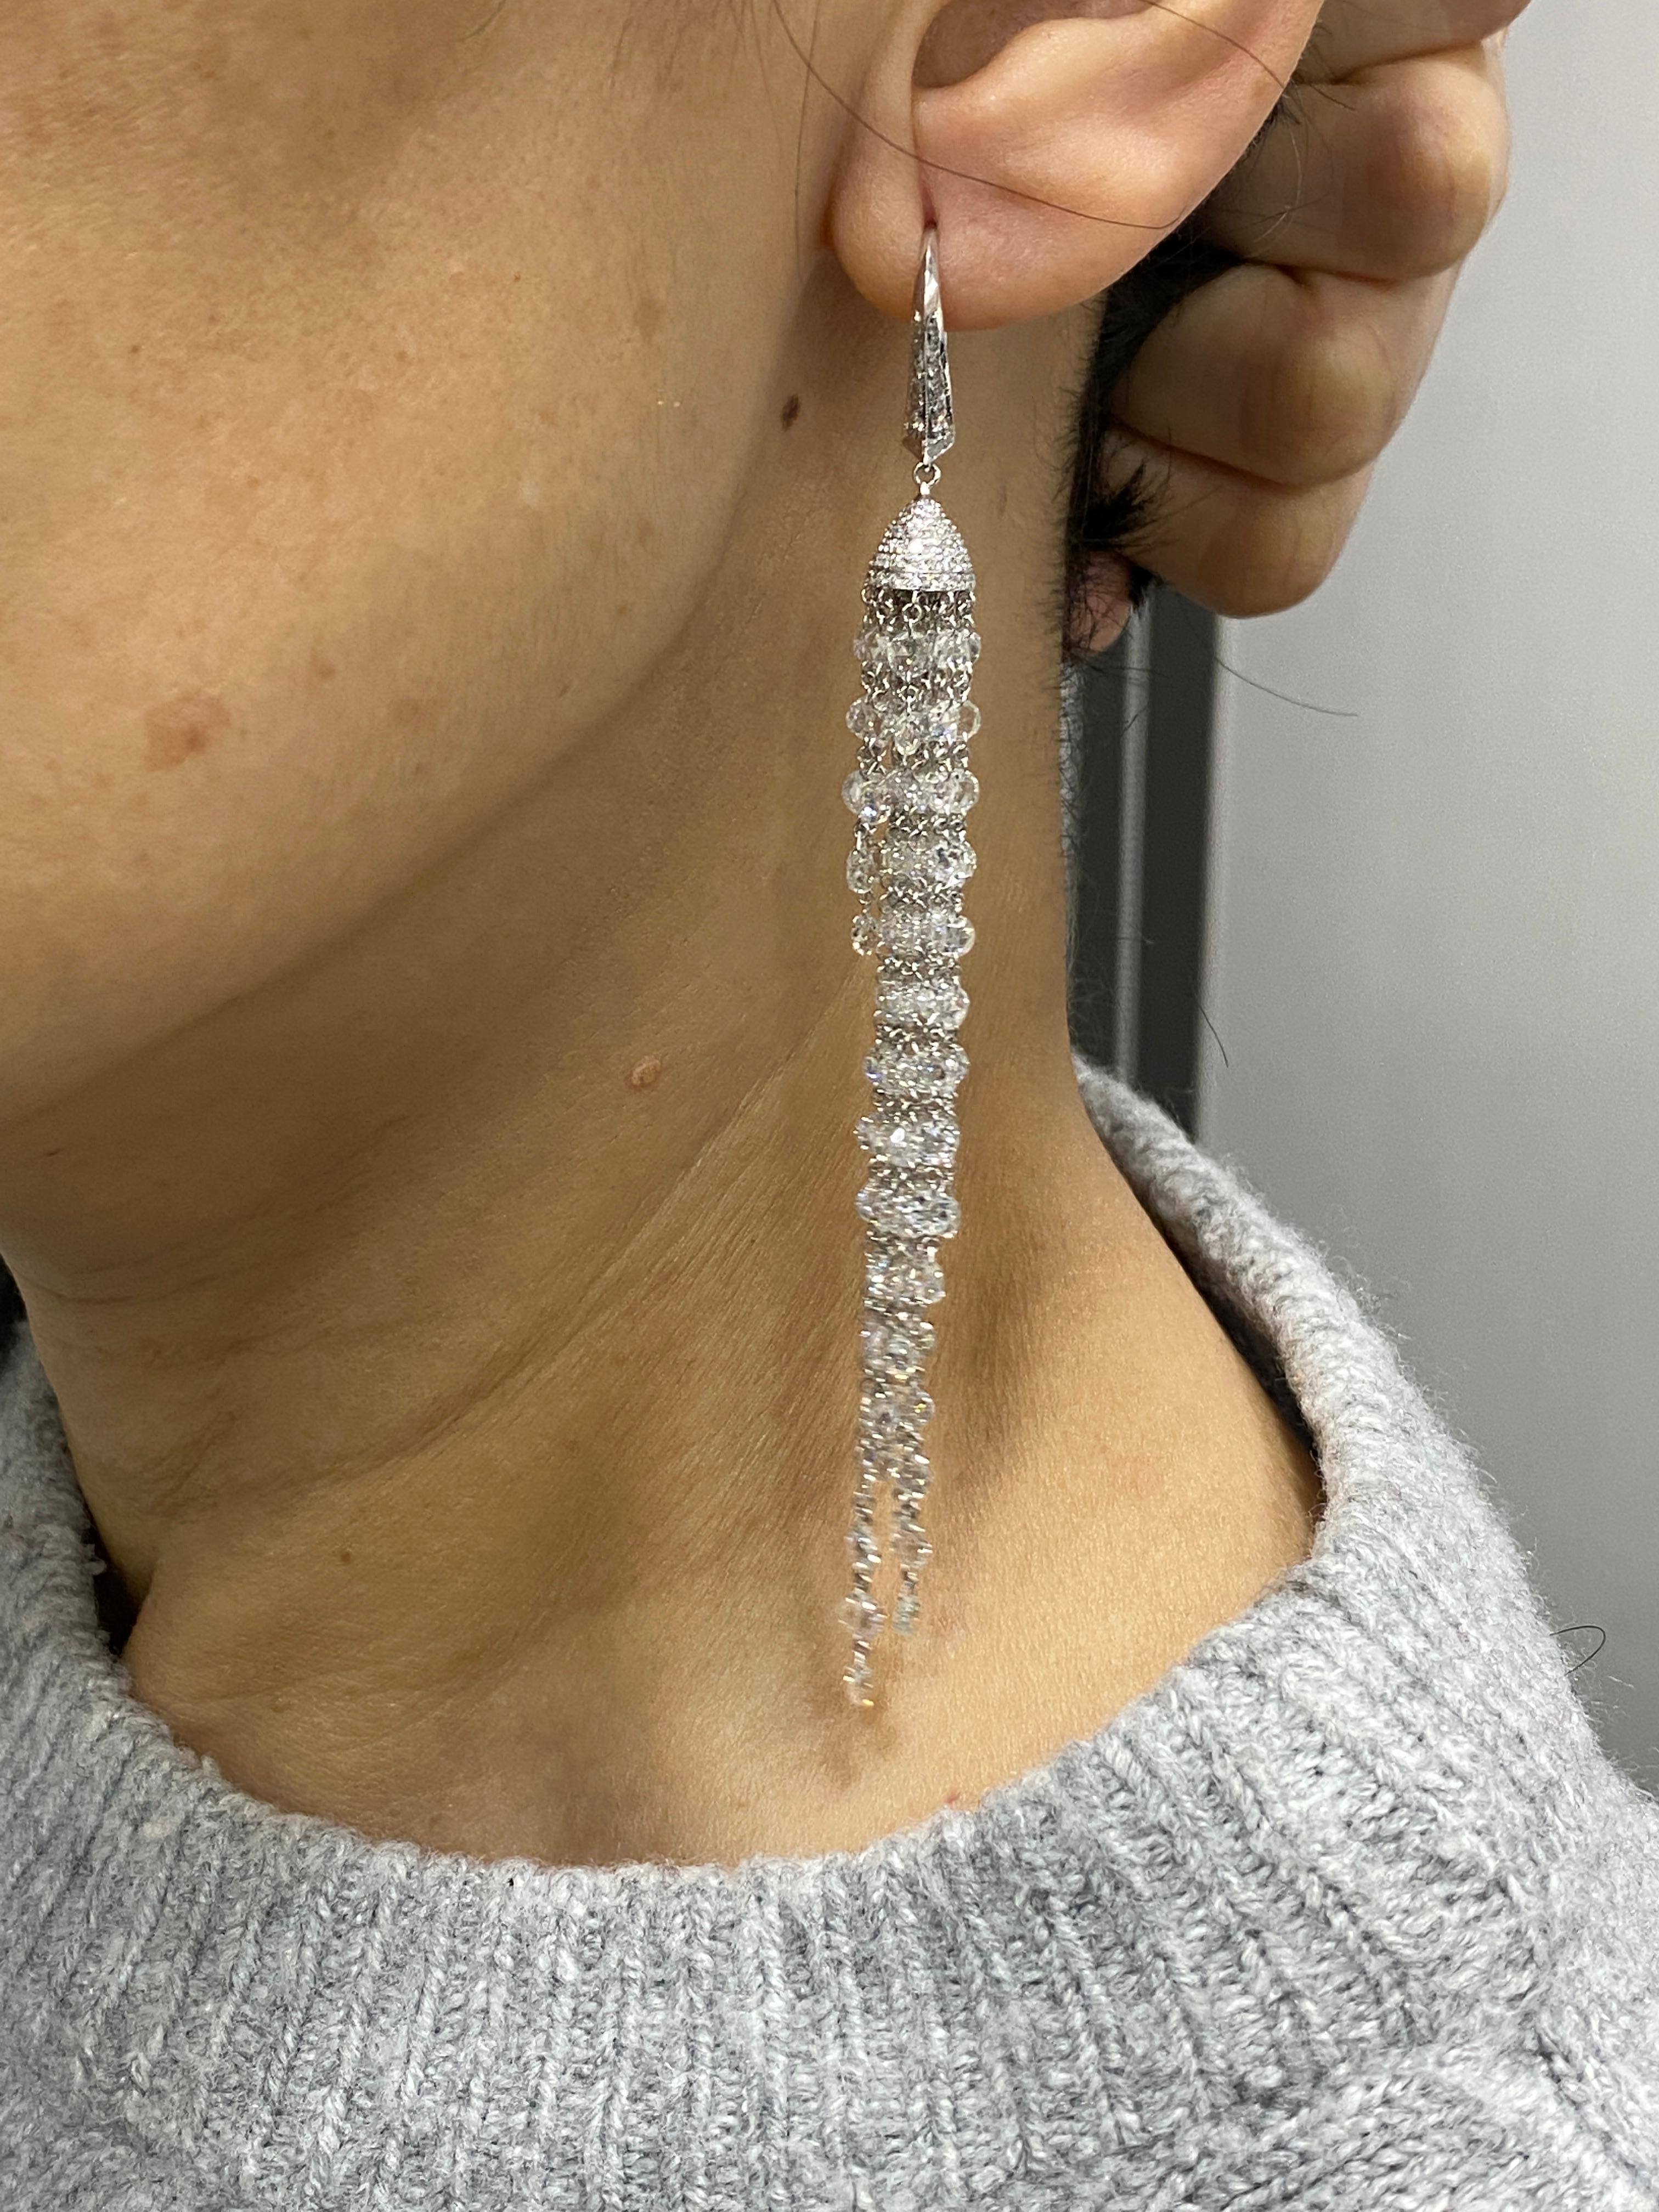 JR 25.44 carats Rose Cut Diamond Tassel Earring

Stylish, graceful and elegant is what this set of diamond tassel earring is. It moves with sheer grace and is made using excellent craftsmanship.

Diamond Weight : 25.44 carats
Length approx. :